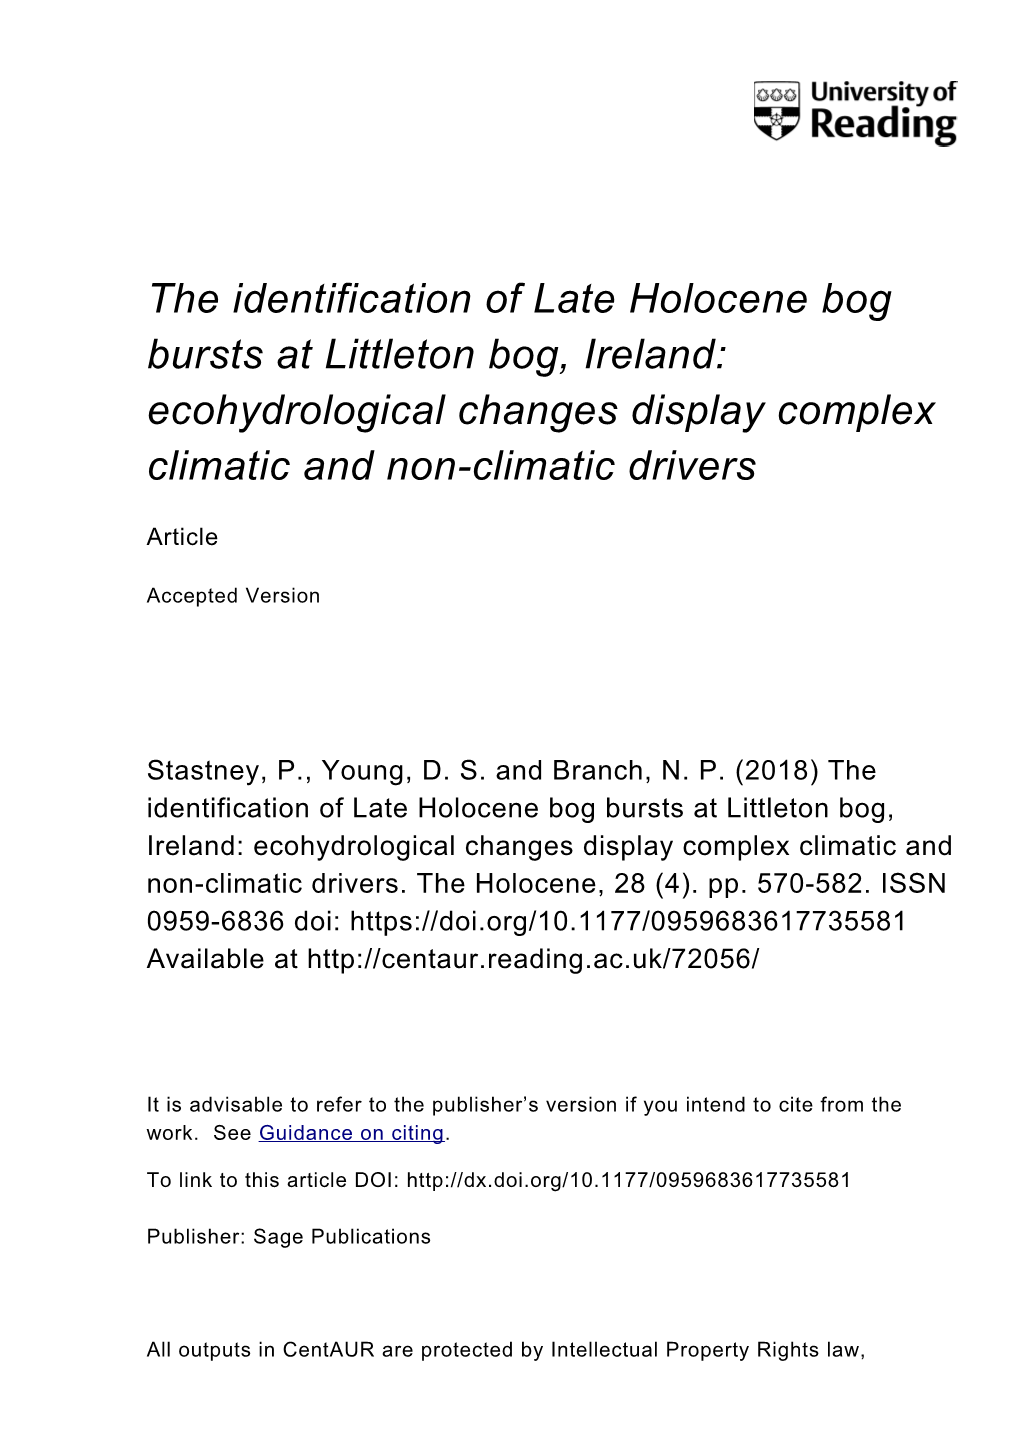 The Identification of Late Holocene Bog Bursts at Littleton Bog, Ireland: Ecohydrological Changes Display Complex Climatic and Non-Climatic Drivers